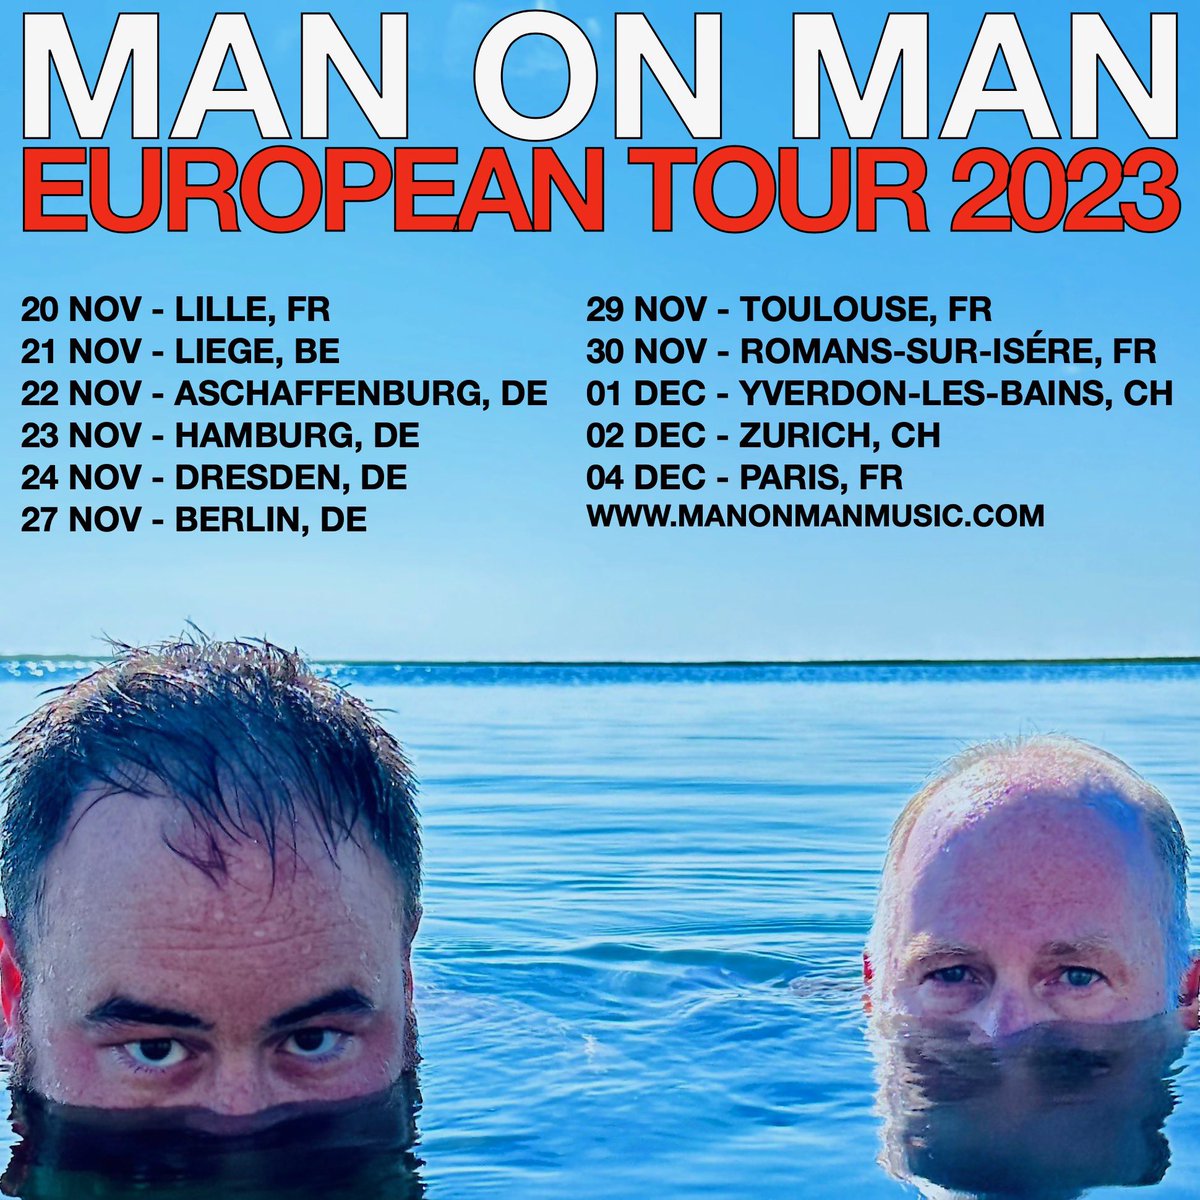 United Kingdom and Europe! We are excited to see you again very soon. Please get tickets now so the venues know y’all wanna see us! manonmanmusic.com/tour